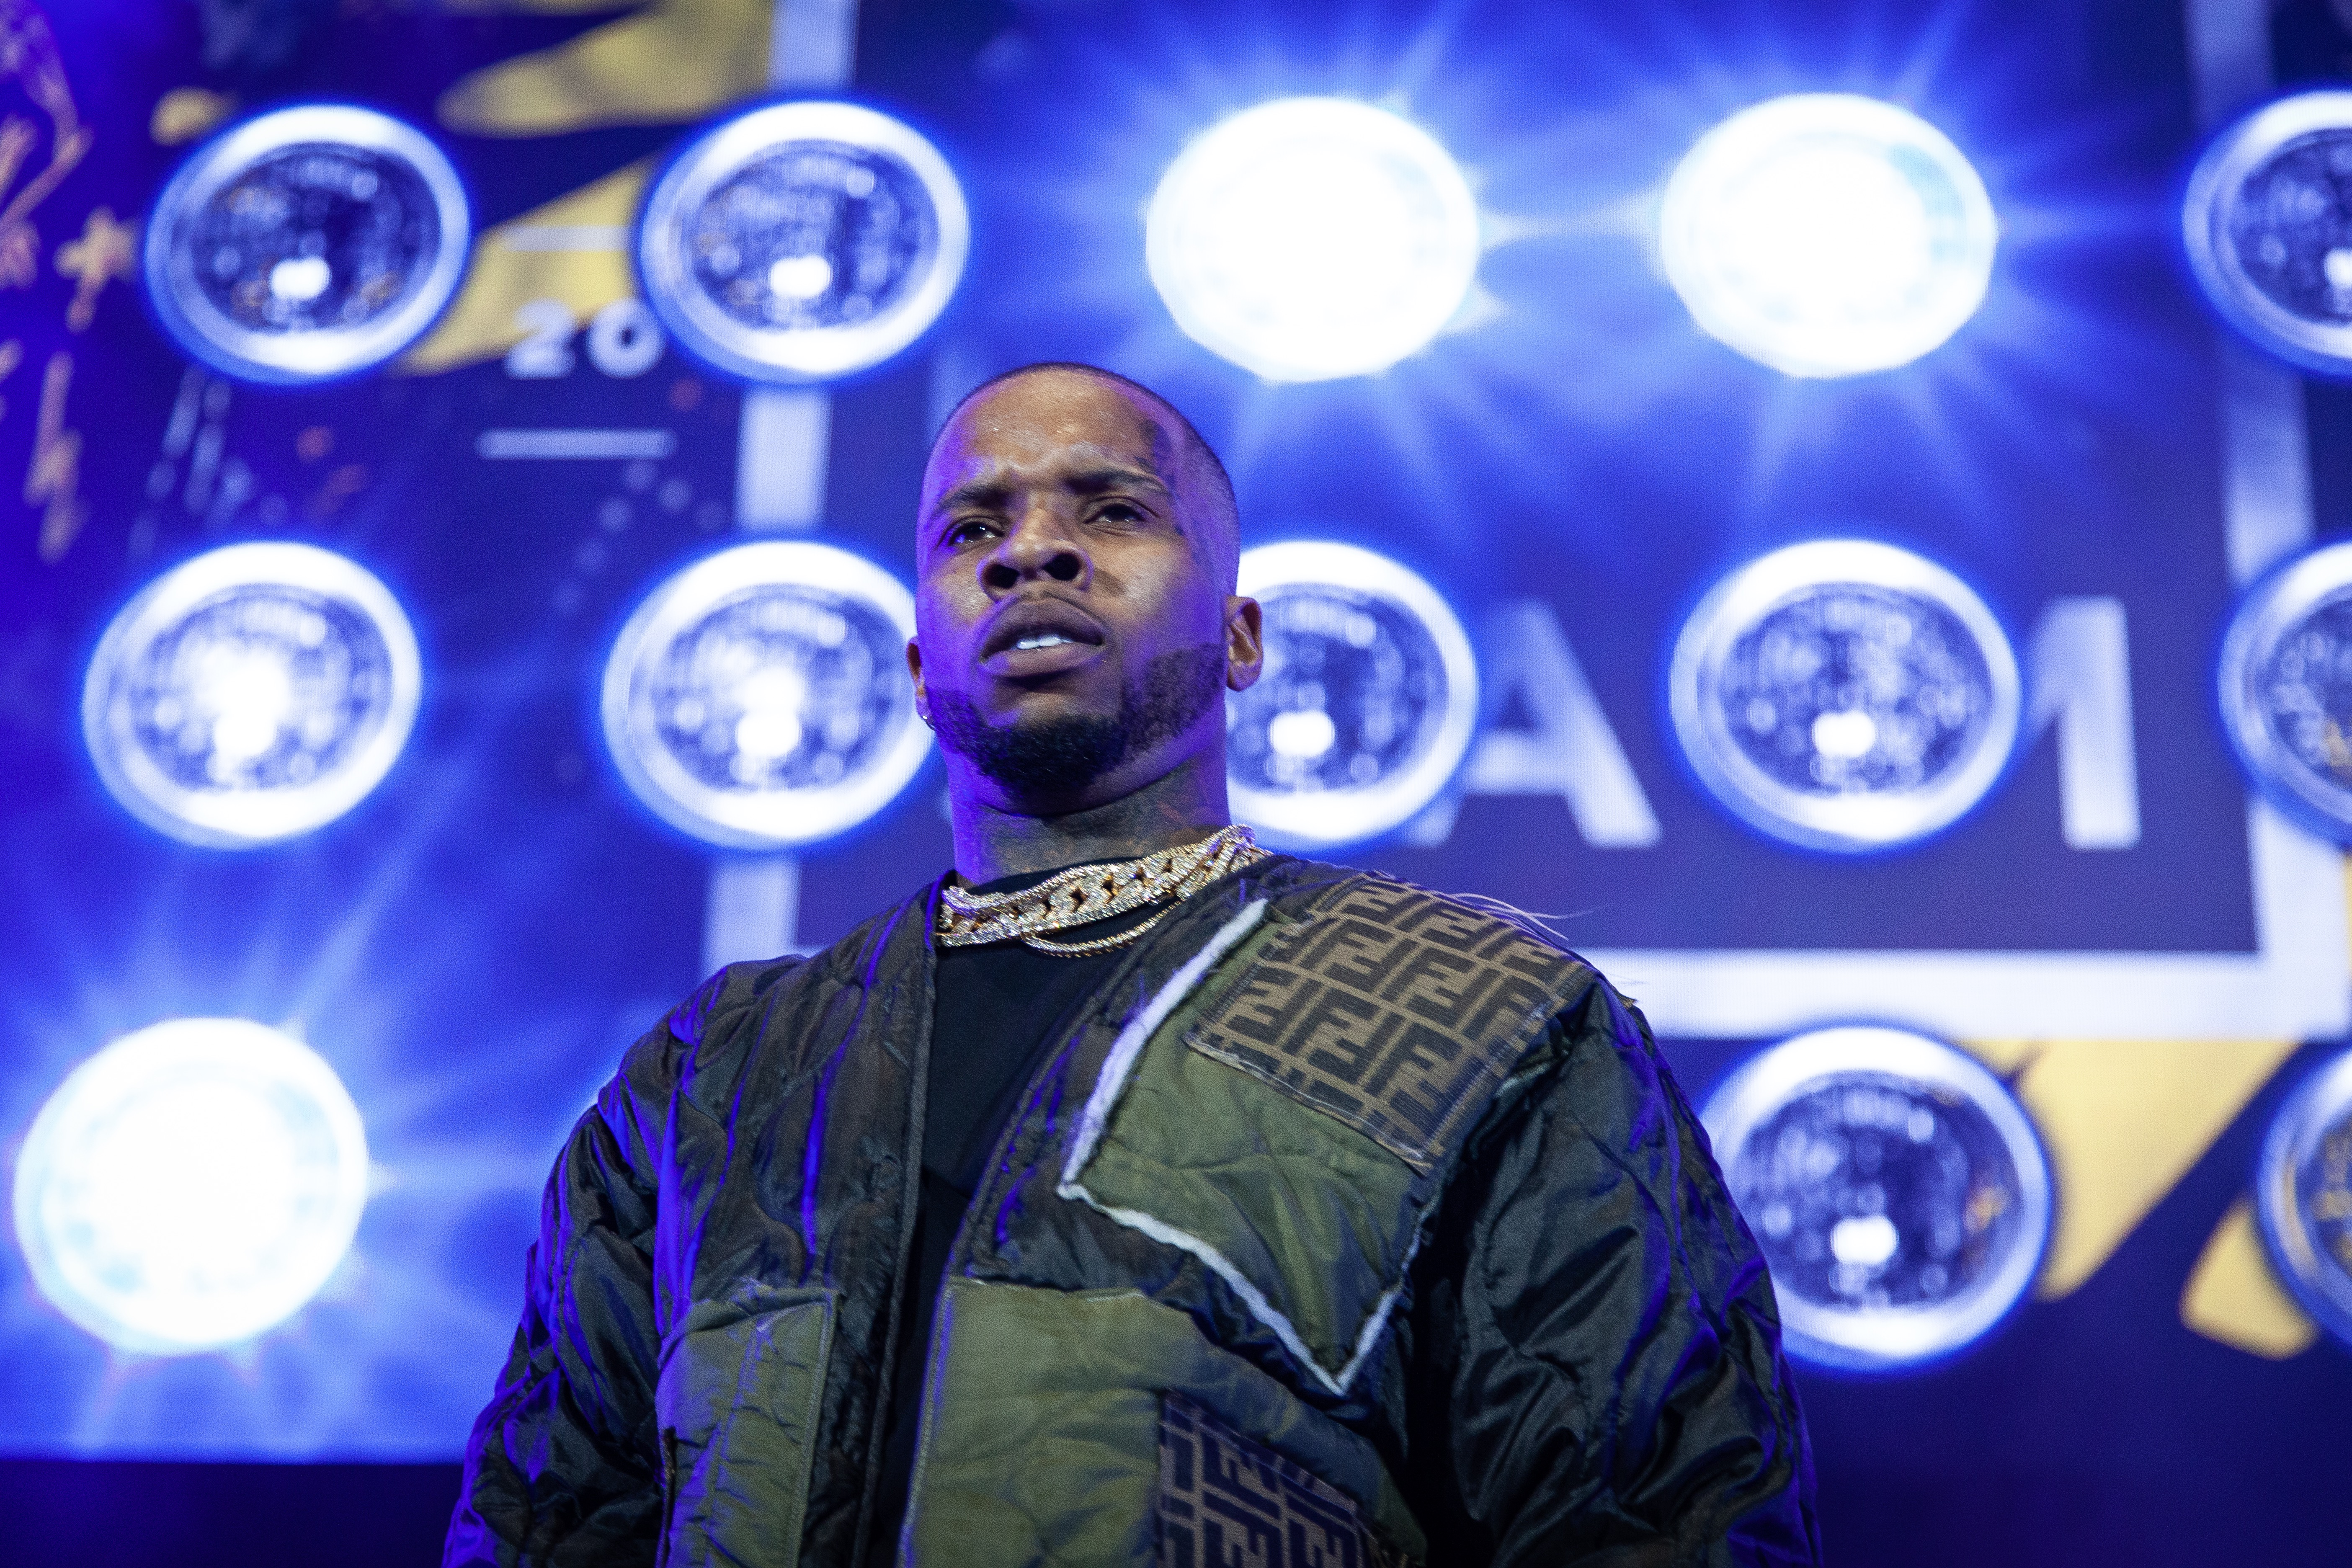 Tory Lanez Starts Dream City Fund To Help Families Affected By COVID-19